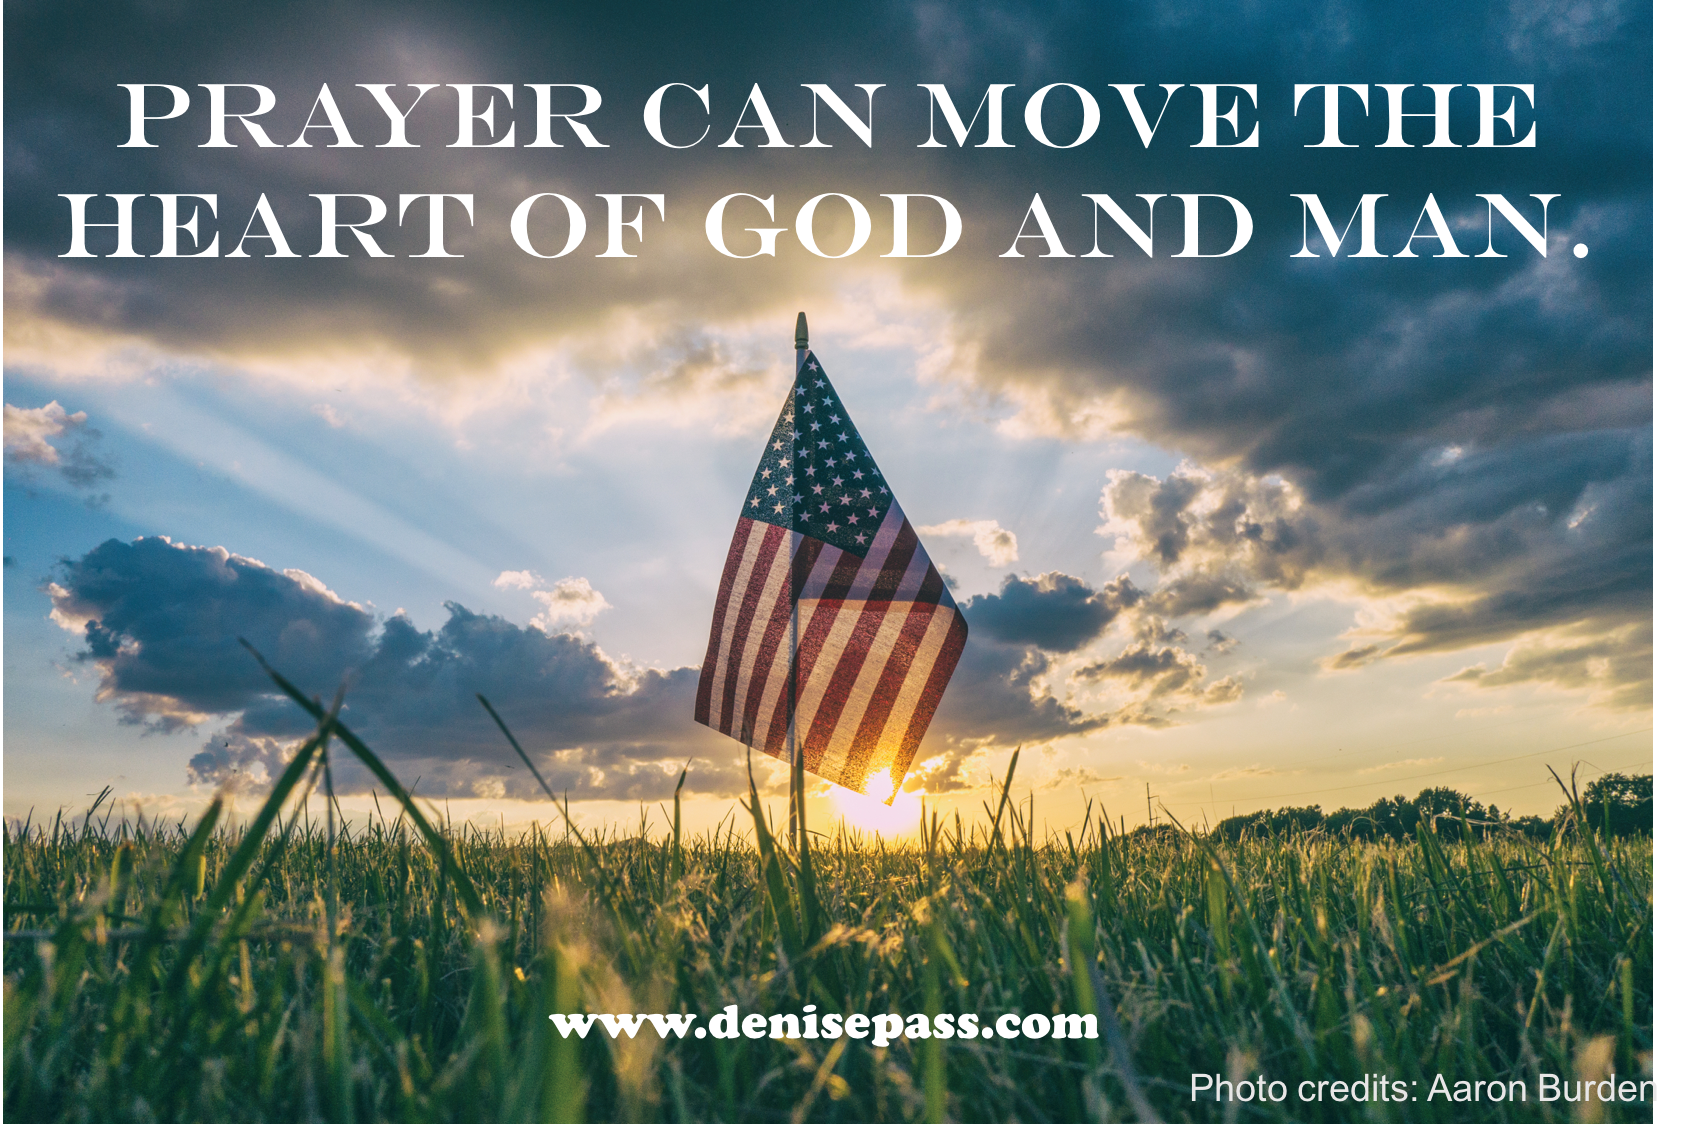 Prayer Can Move the Heart of God and Man